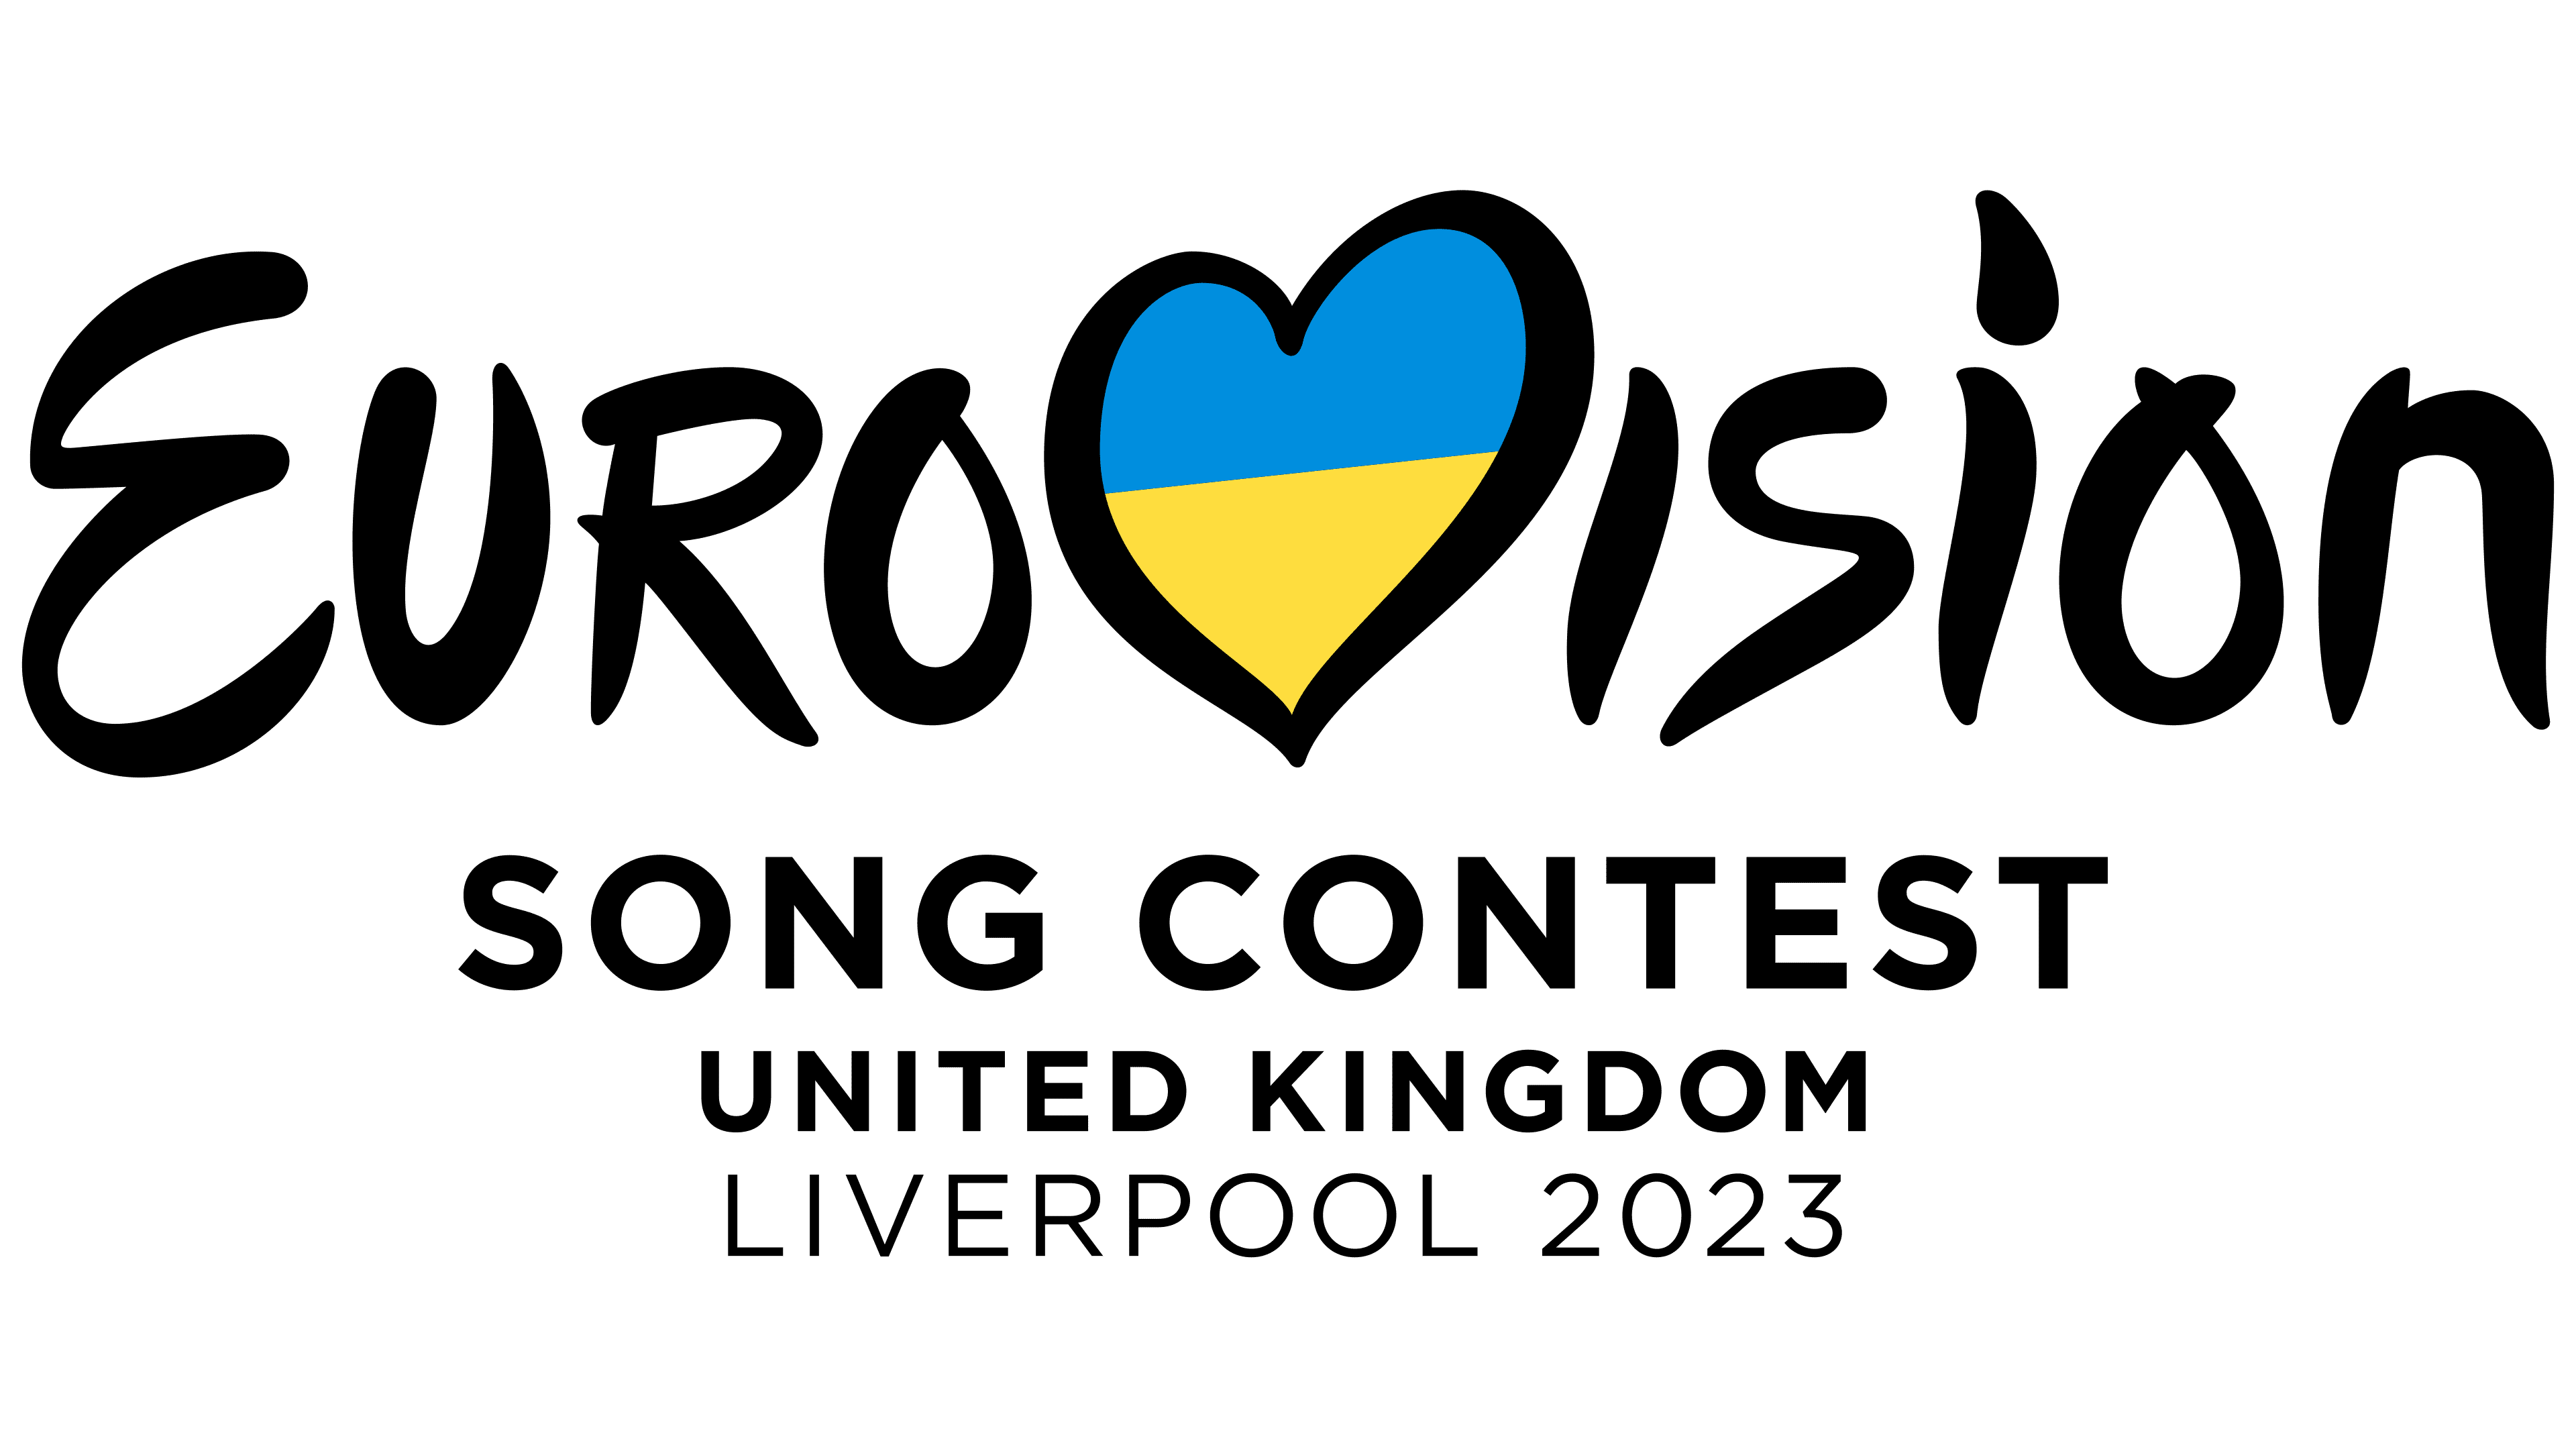 Brand New: New Logo for Eurovision Song Contest by Storytegic | Eurovision  song contest, Songs, Eurovision